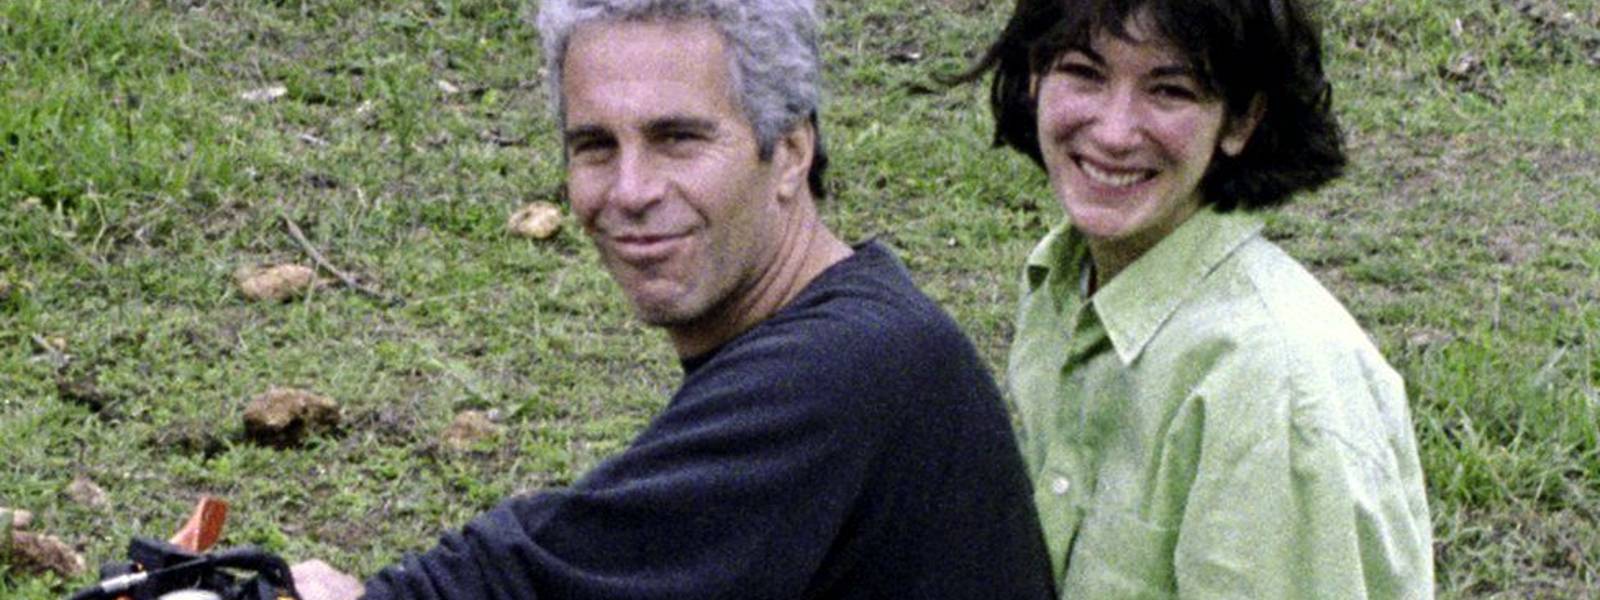 Ghislaine Maxwell guilty of helping Epstein abuse